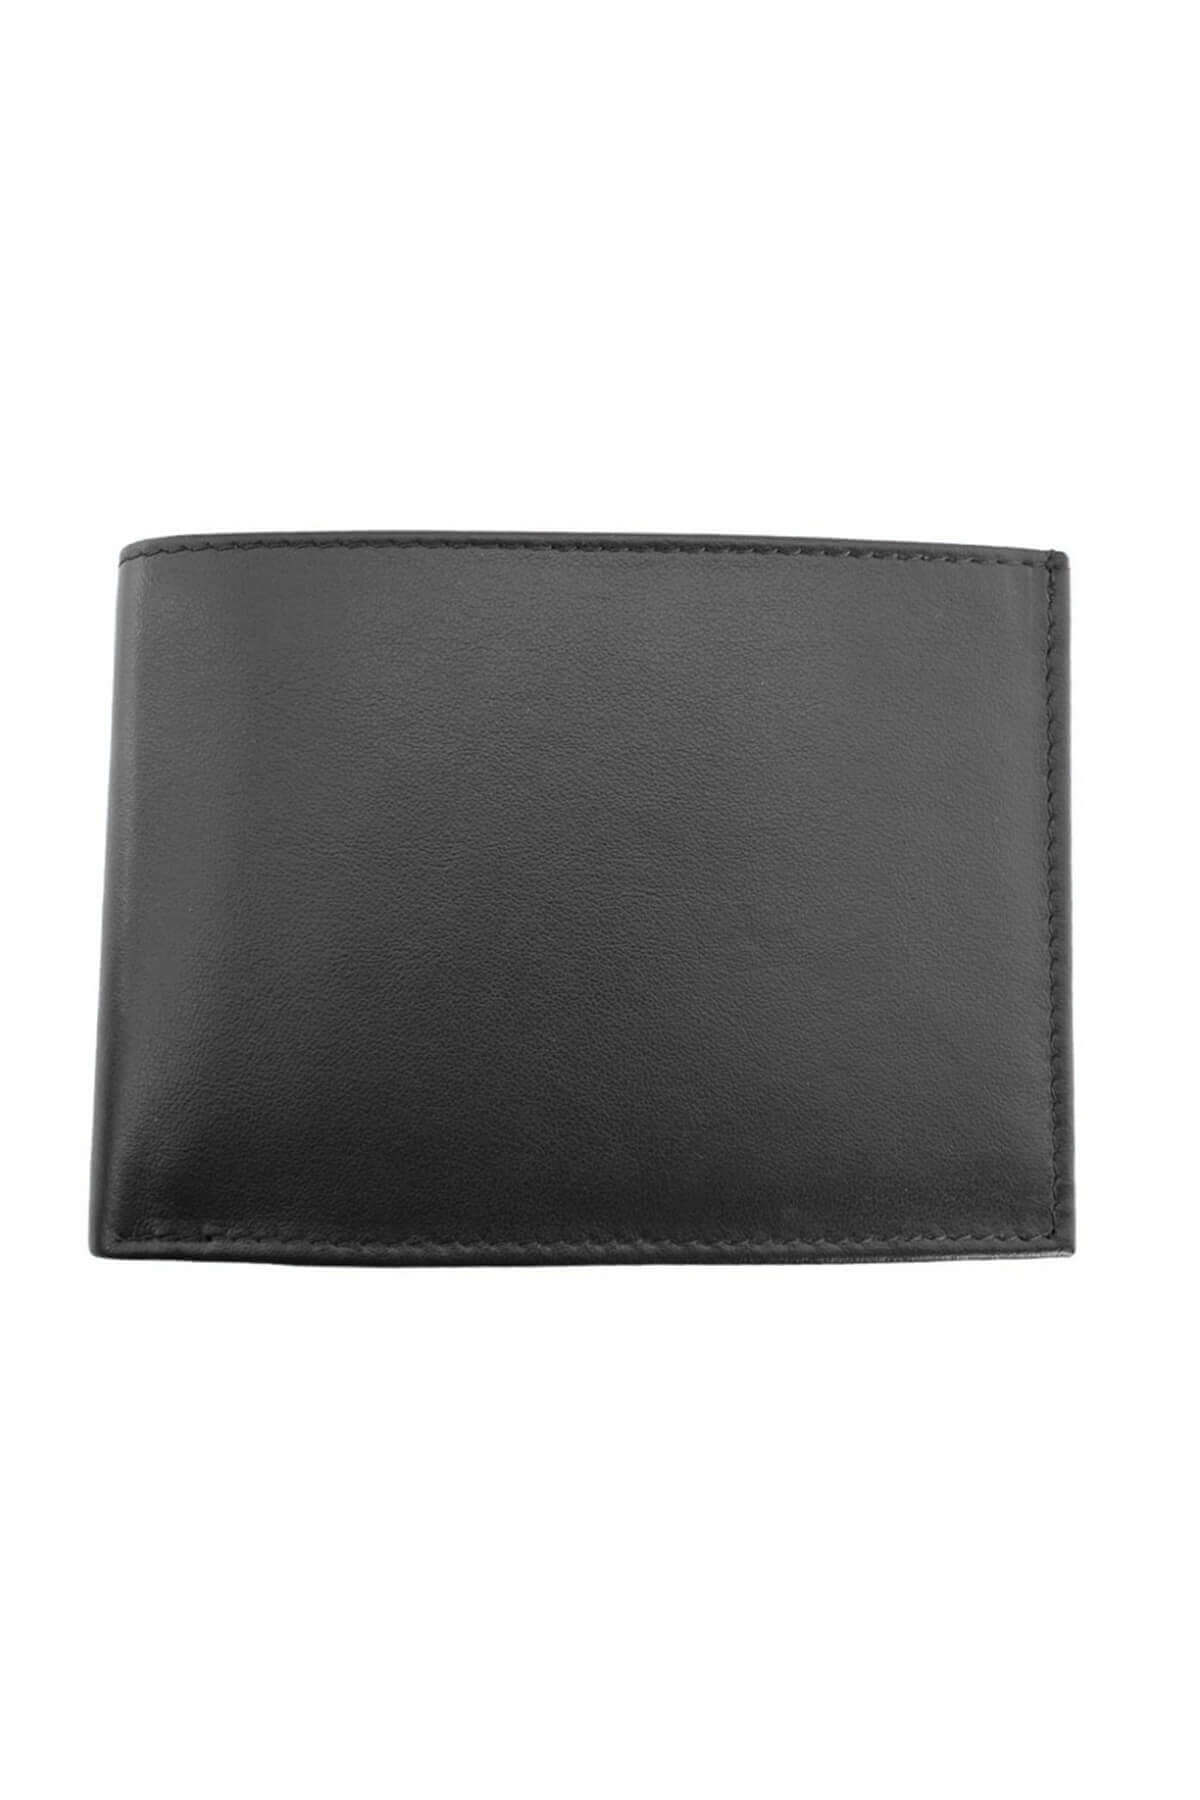 Bor Leather Wallet